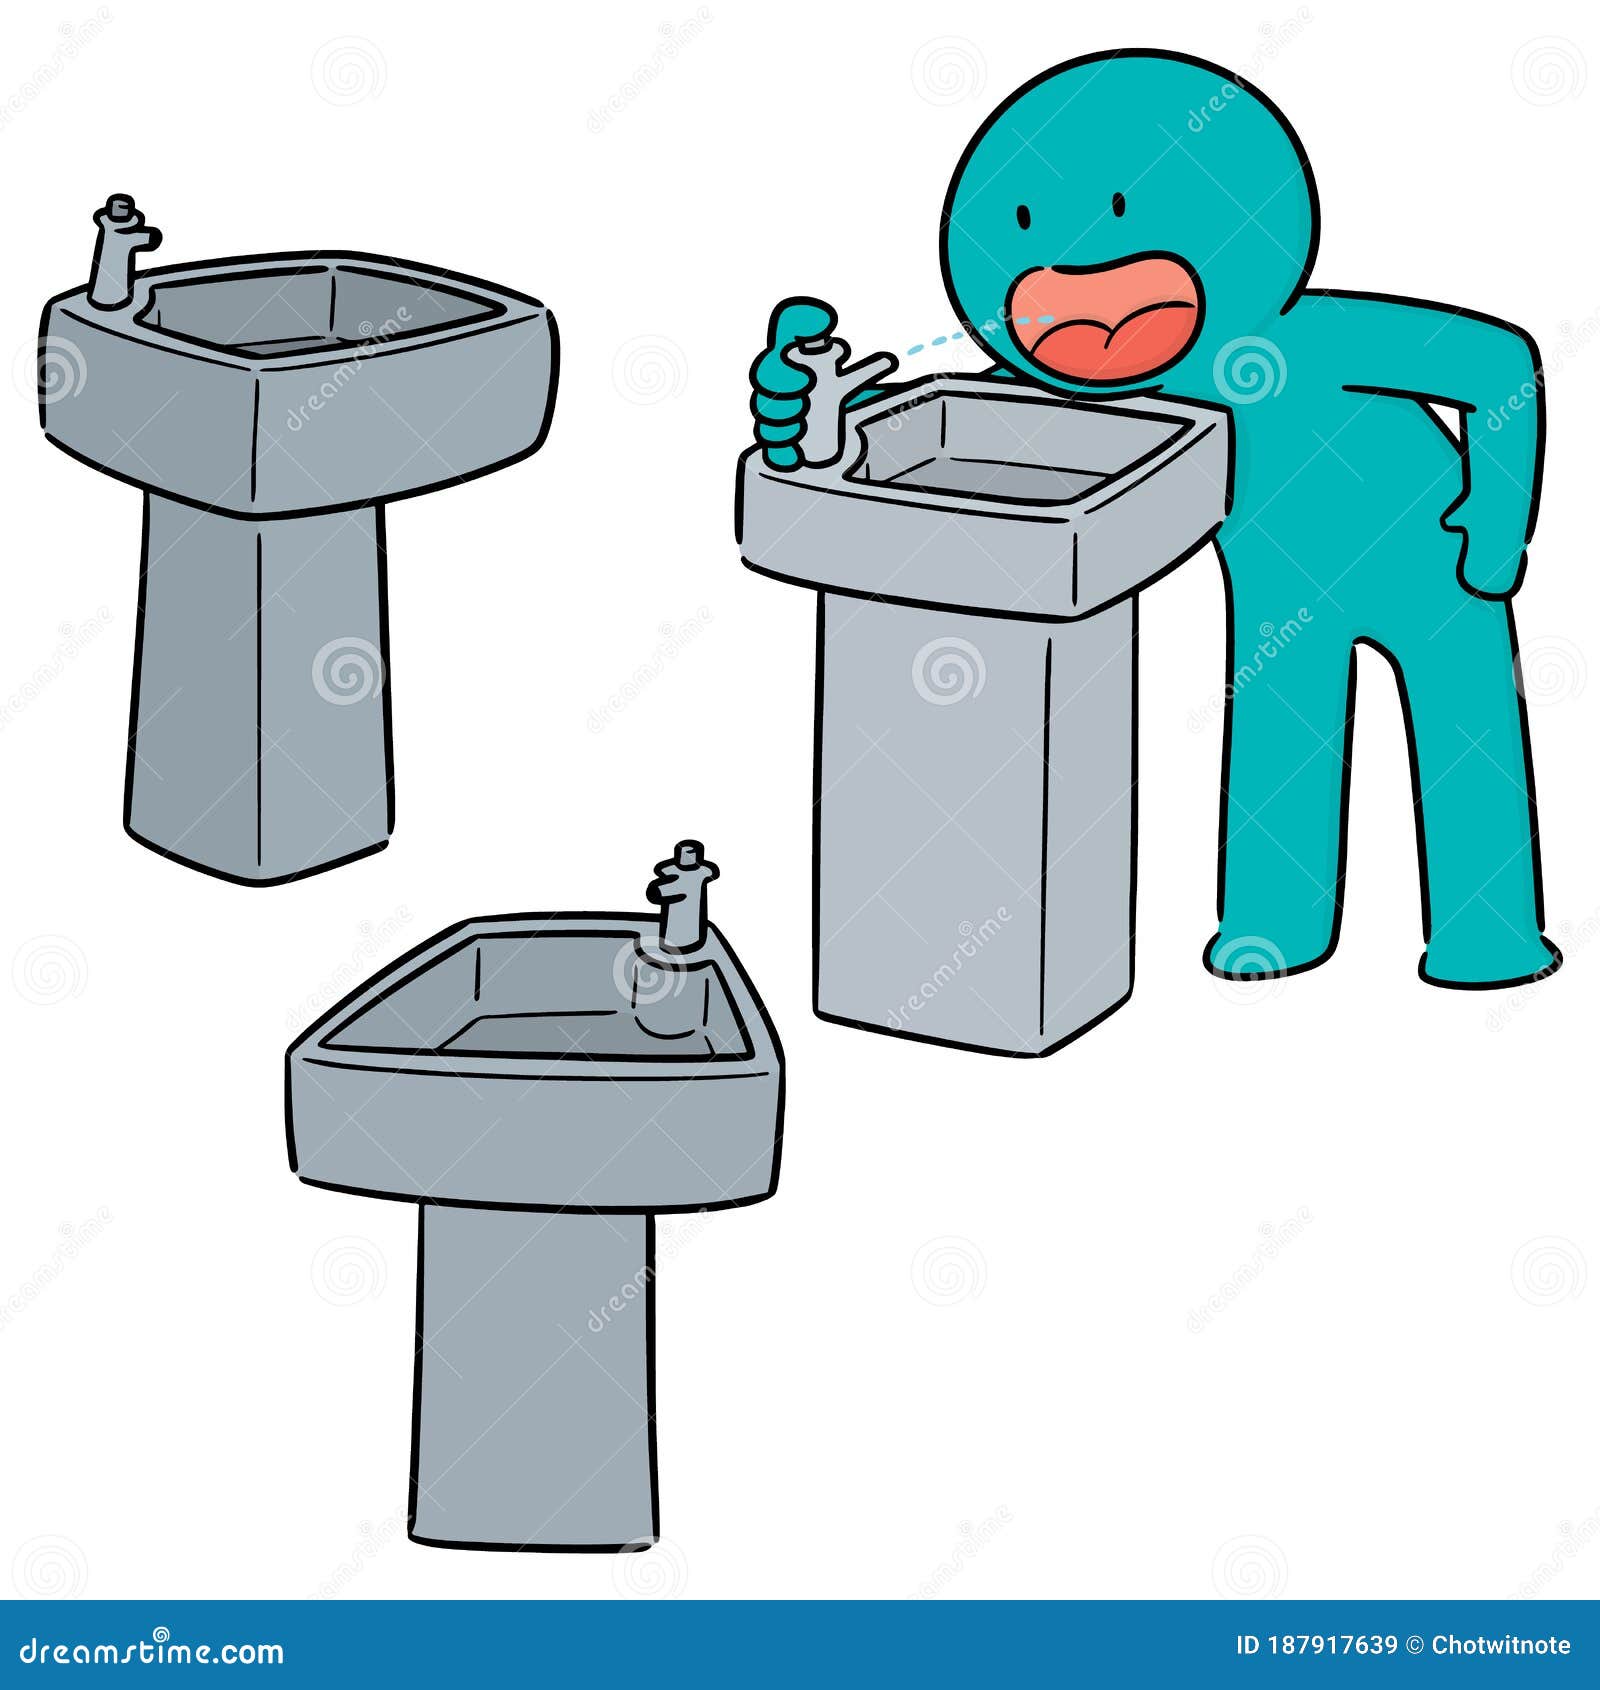 Vector Set of Drinking Water Fountain Stock Vector - Illustration of drawn,  graphic: 187917639